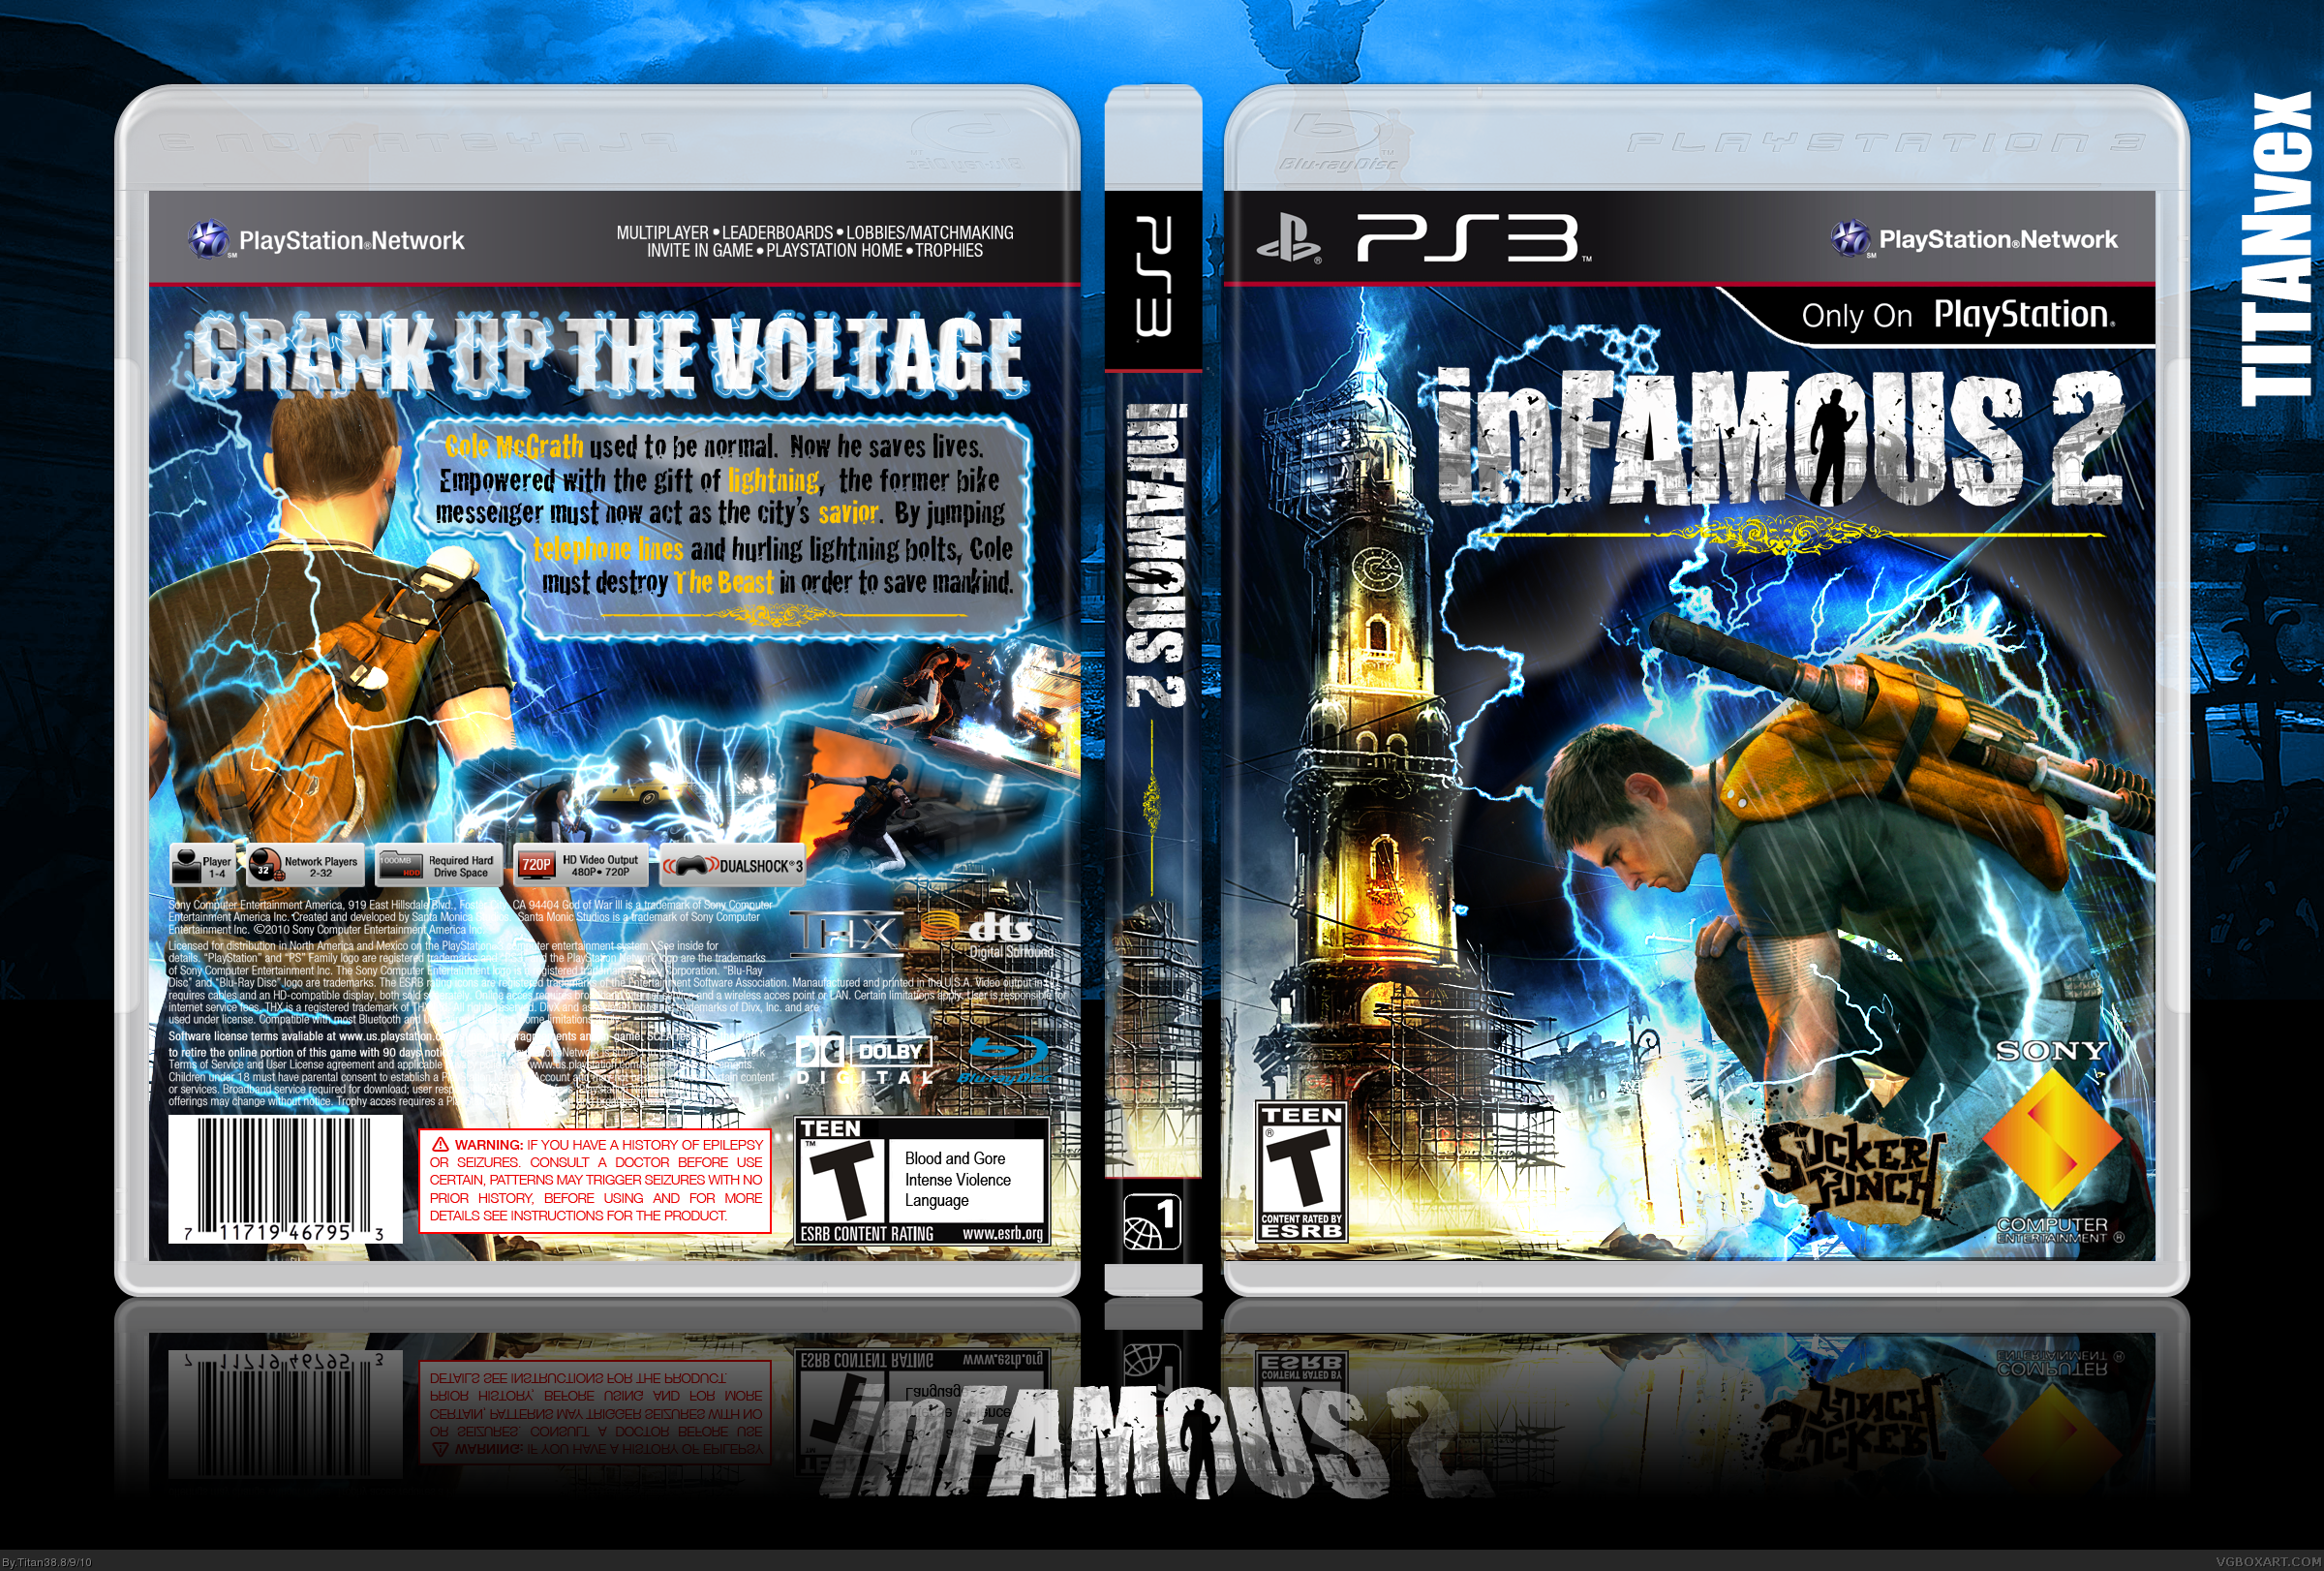 inFAMOUS 2 box cover